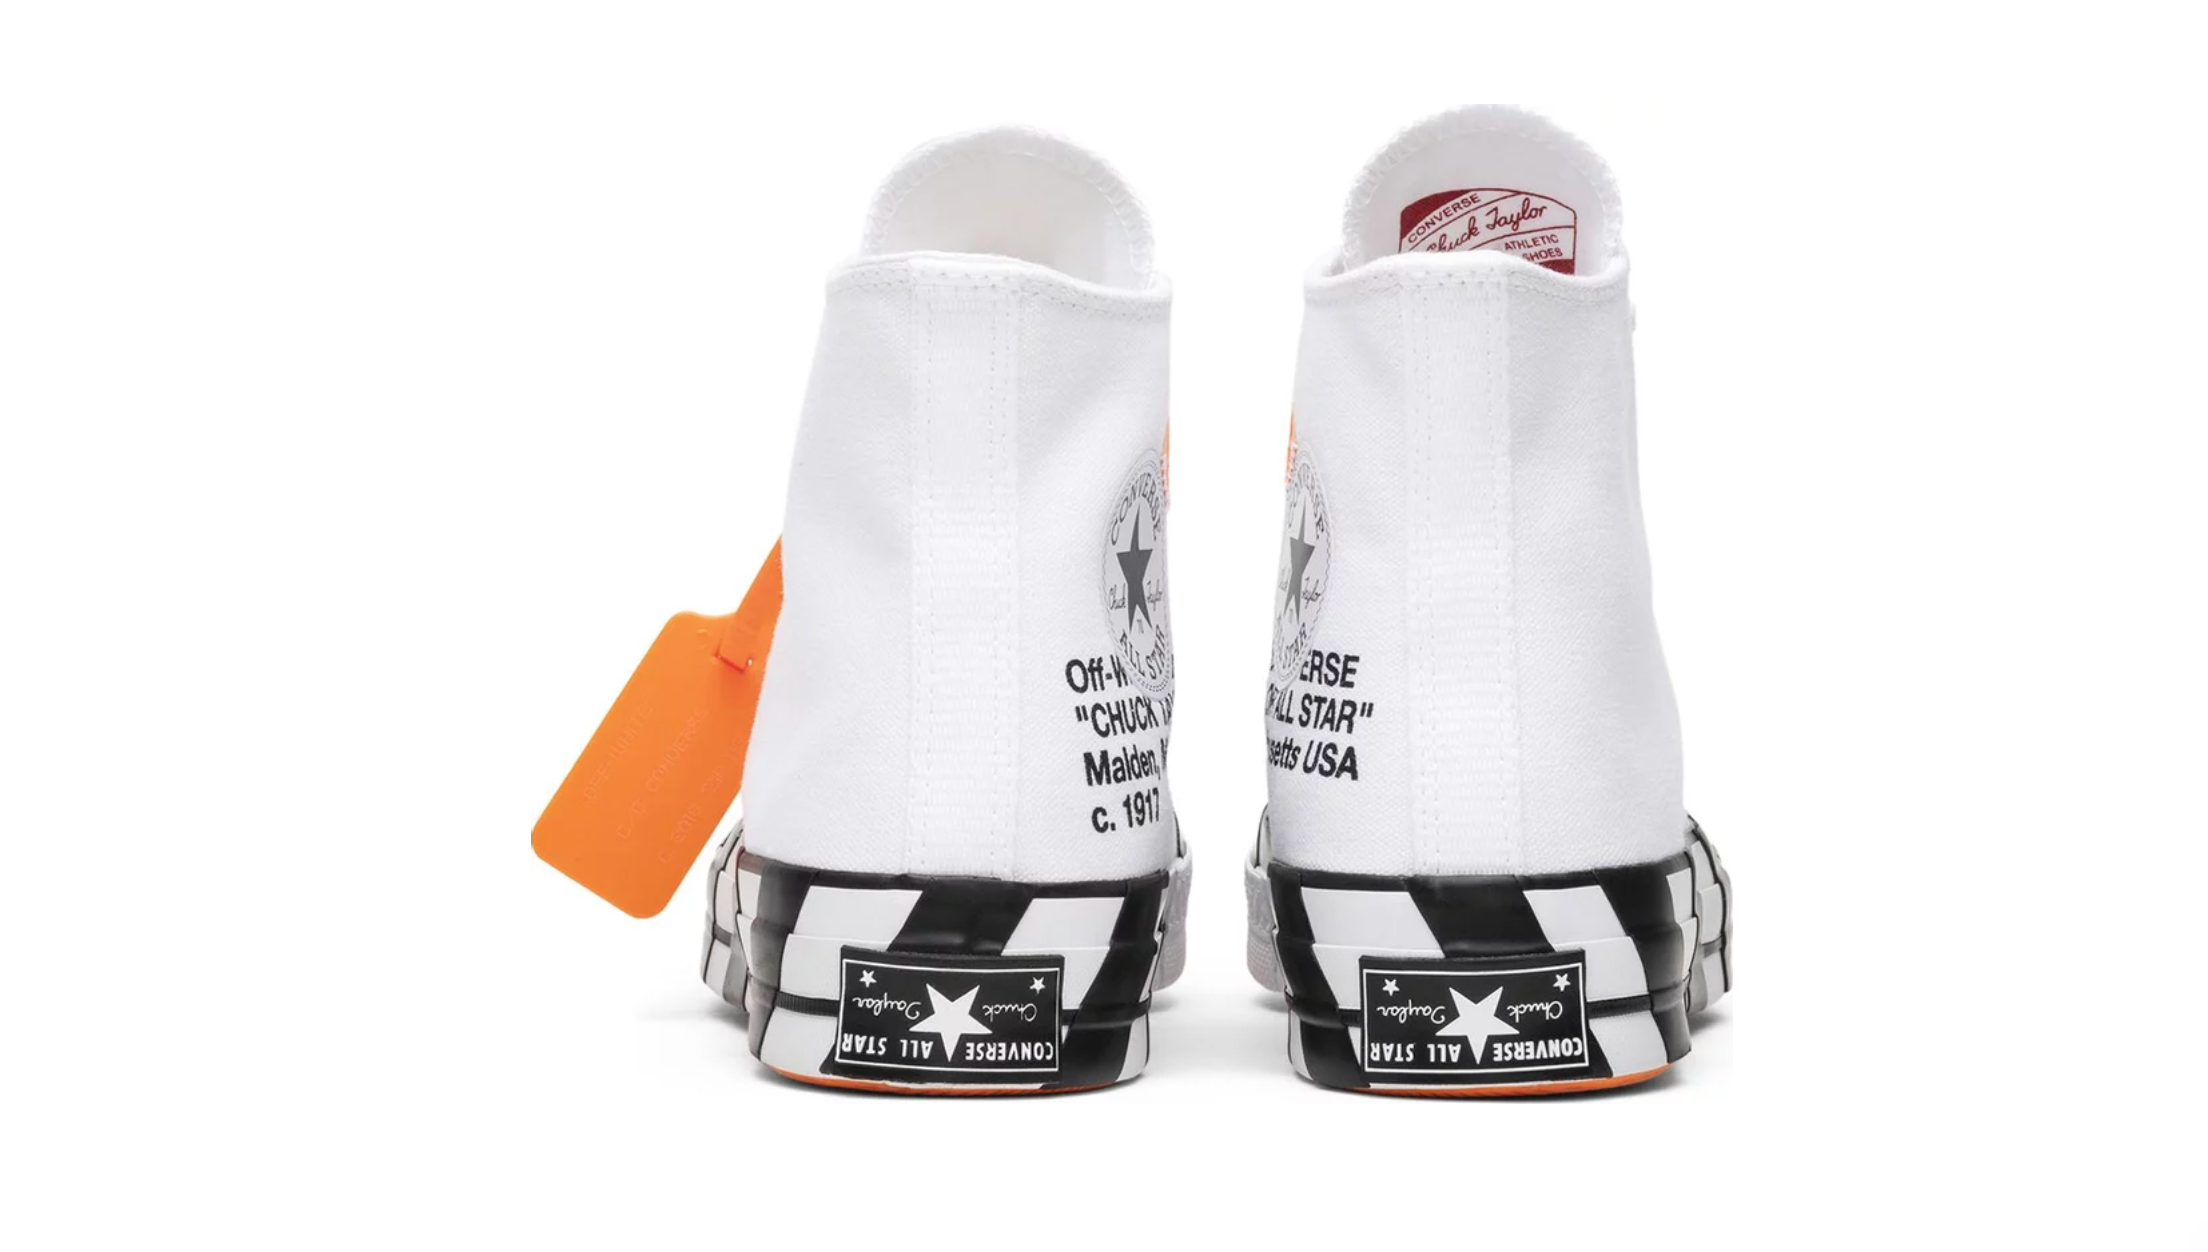 OFF-WHITE X CONVERSE CHUCK TAYLOR ALLE STERNE HI